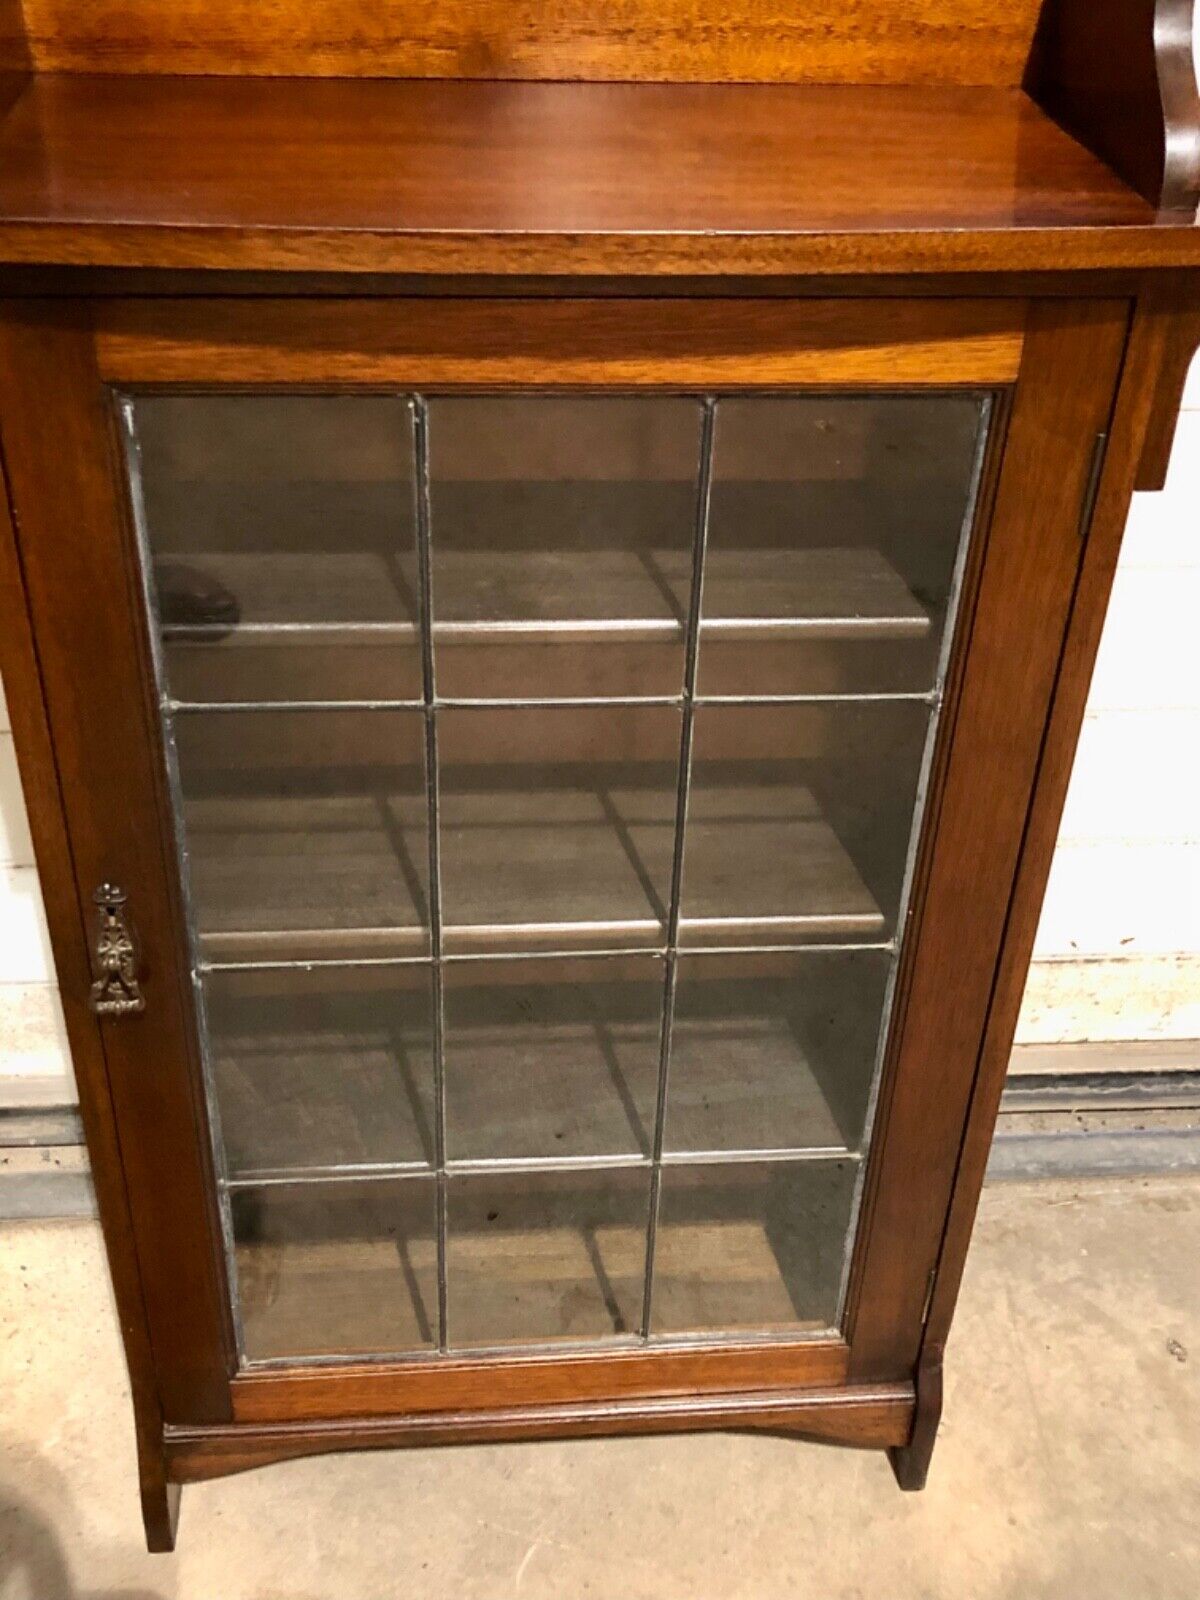 000778....Handsome Vintage Arts And Crafts Mahogany Bookcase / Display Cabinet